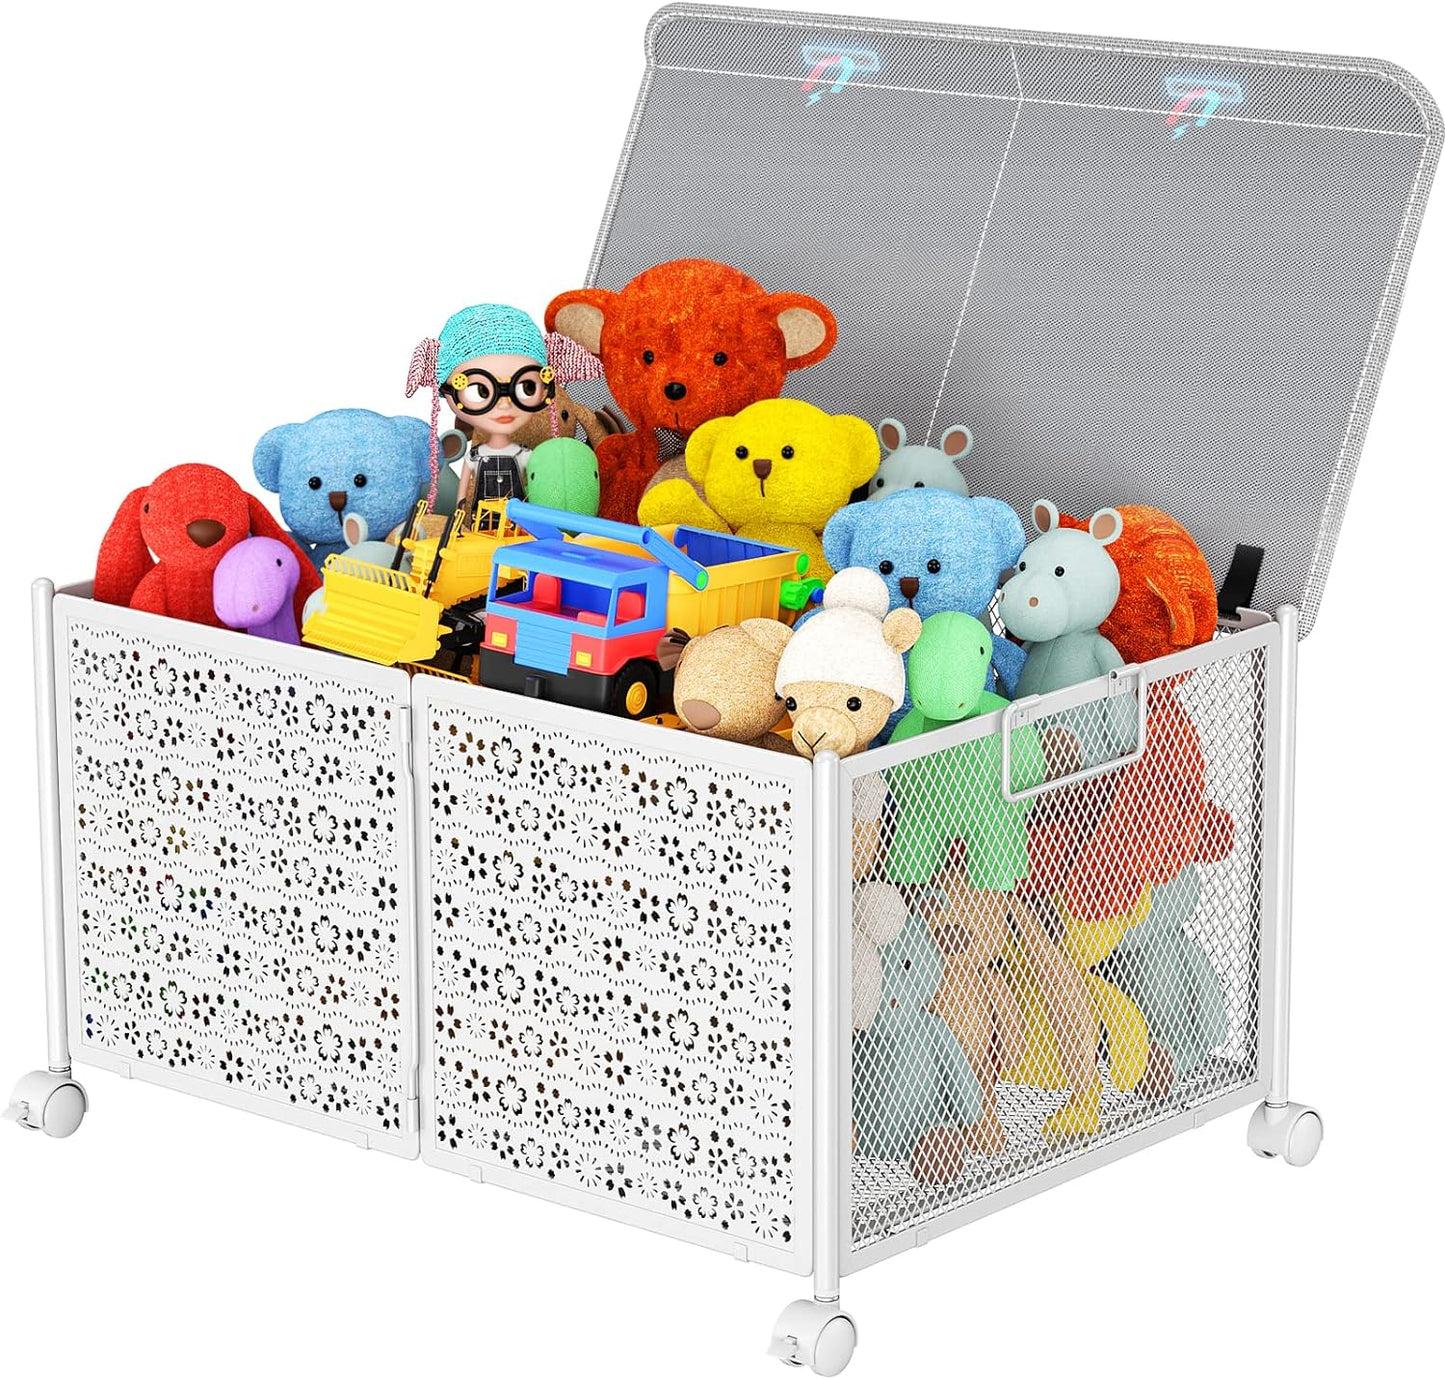 Nefoso Toy Box Storage, Foldable Metal Kids Toy Chest with Wheels for Bedroom Nursery Playroom